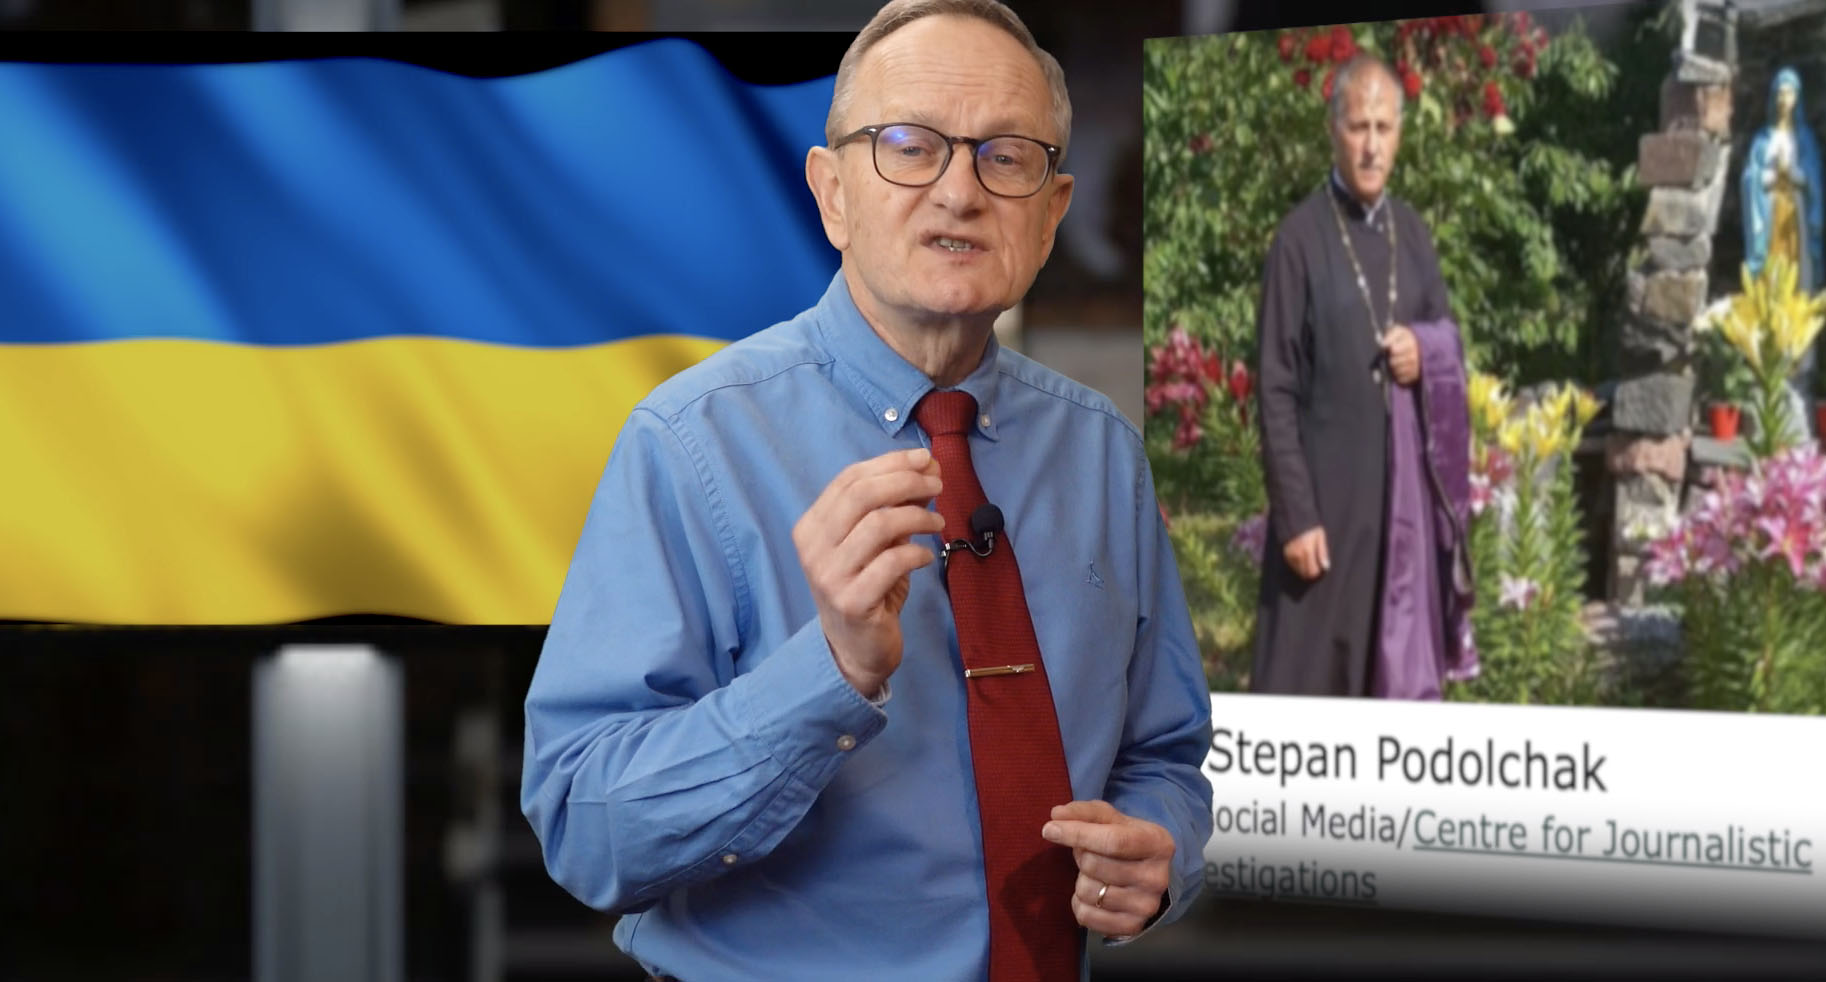 Ukrainian Christian Leaders Tortured, Killed and Disappearing